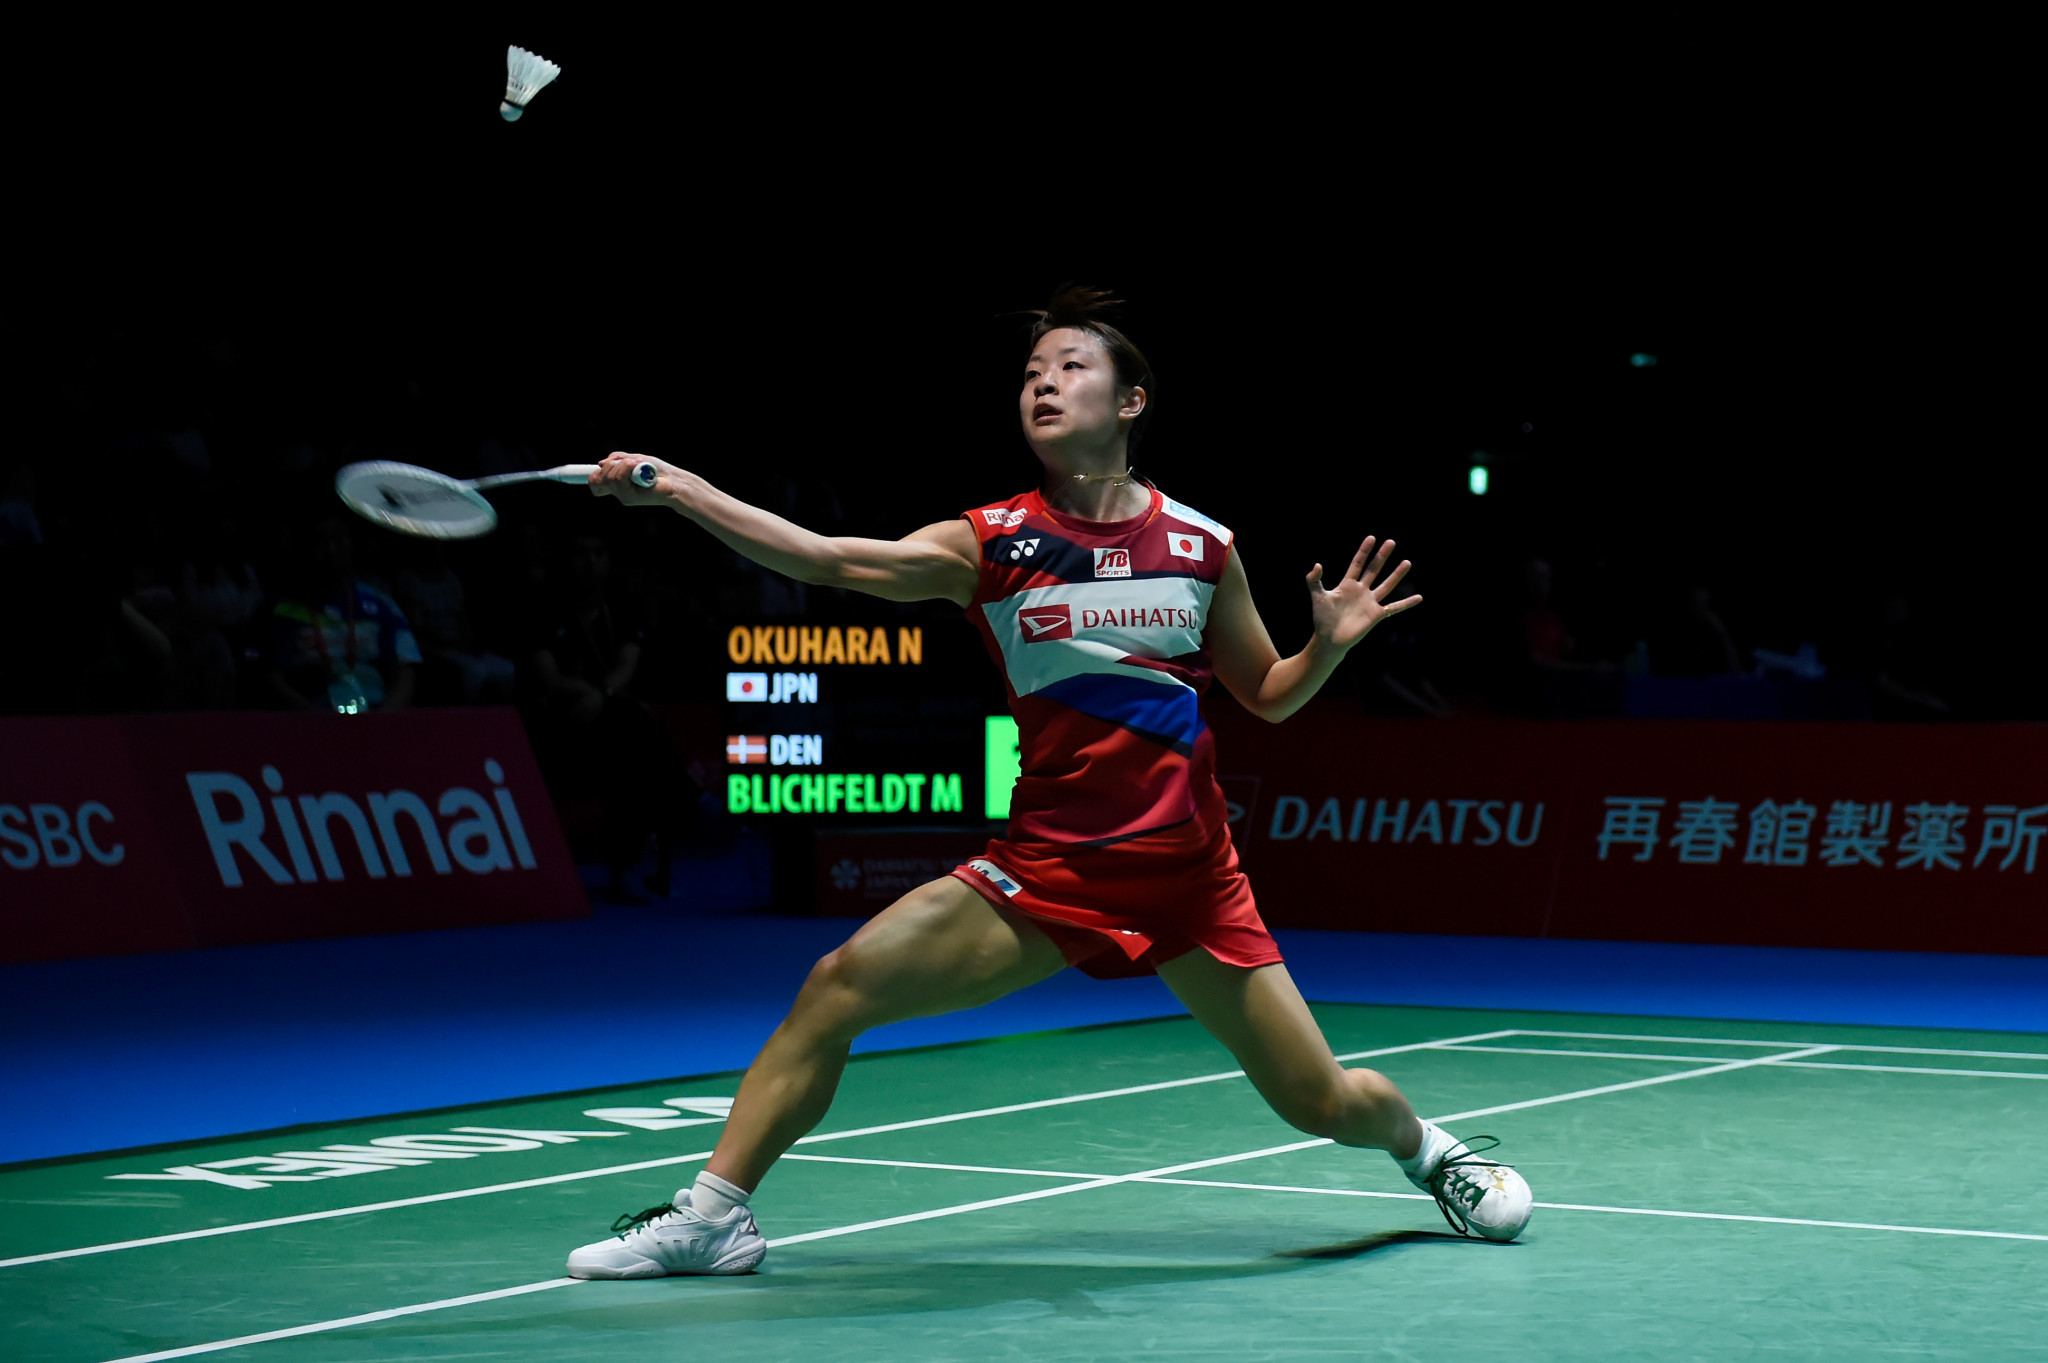 Former world champion Nozomi Okuhara went through in the women's tournament ©Getty Images